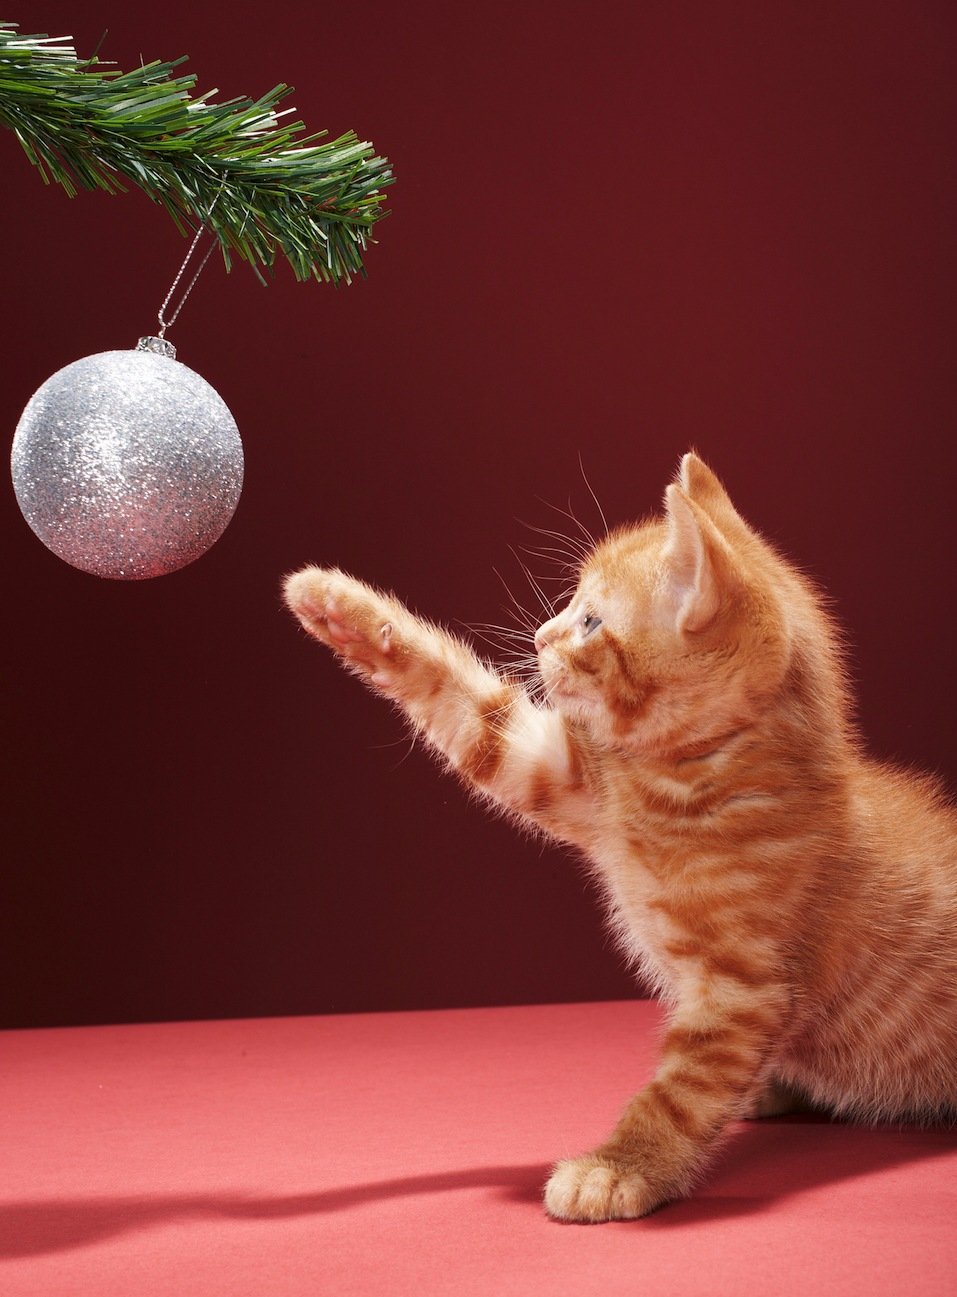 Kitten playing with Christmas bauble on tree